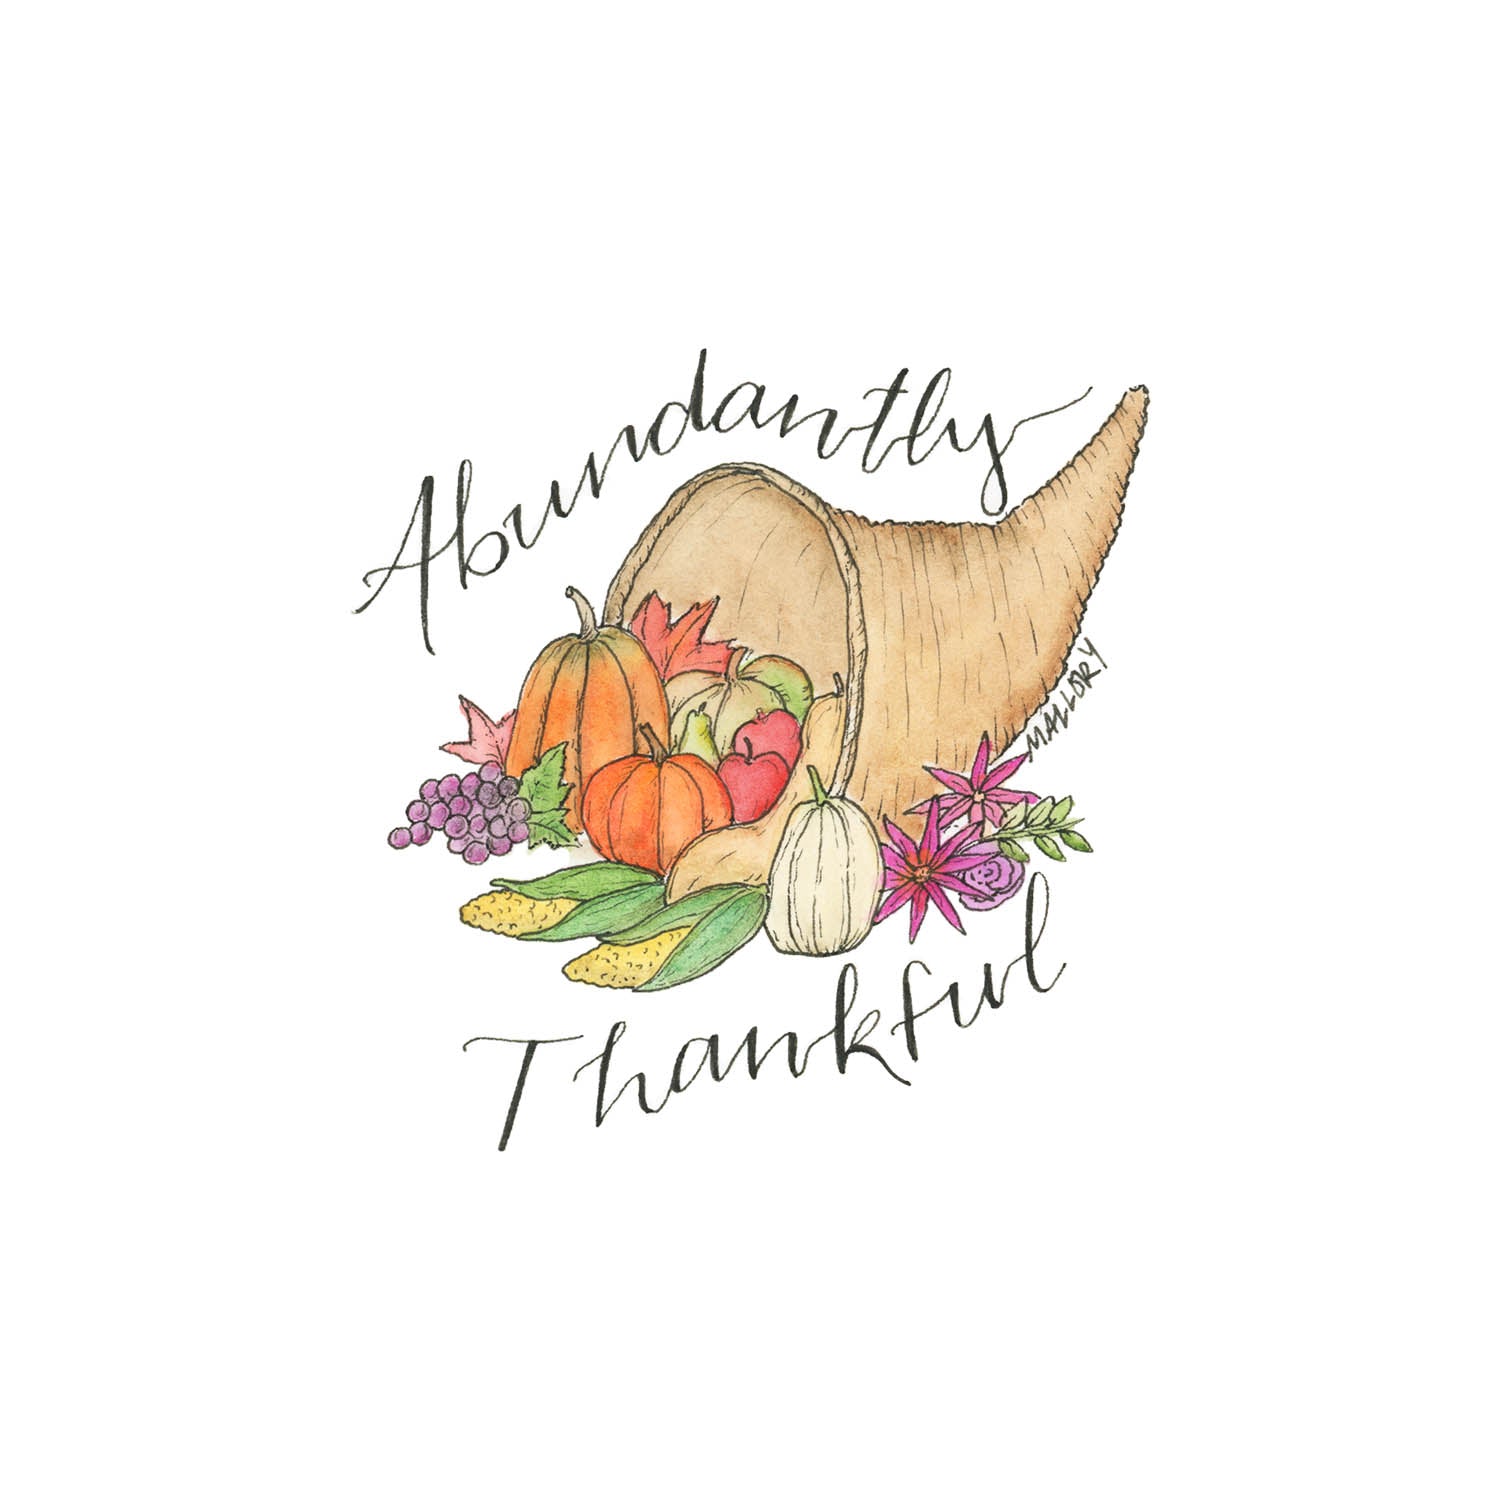 Thanksgiving card with a cornucopia filled with fresh pumpkins and vegetables in orange, green purple and natural colors. The words, "Abundantly Thankful" are depicted on the Thanksgiving card.